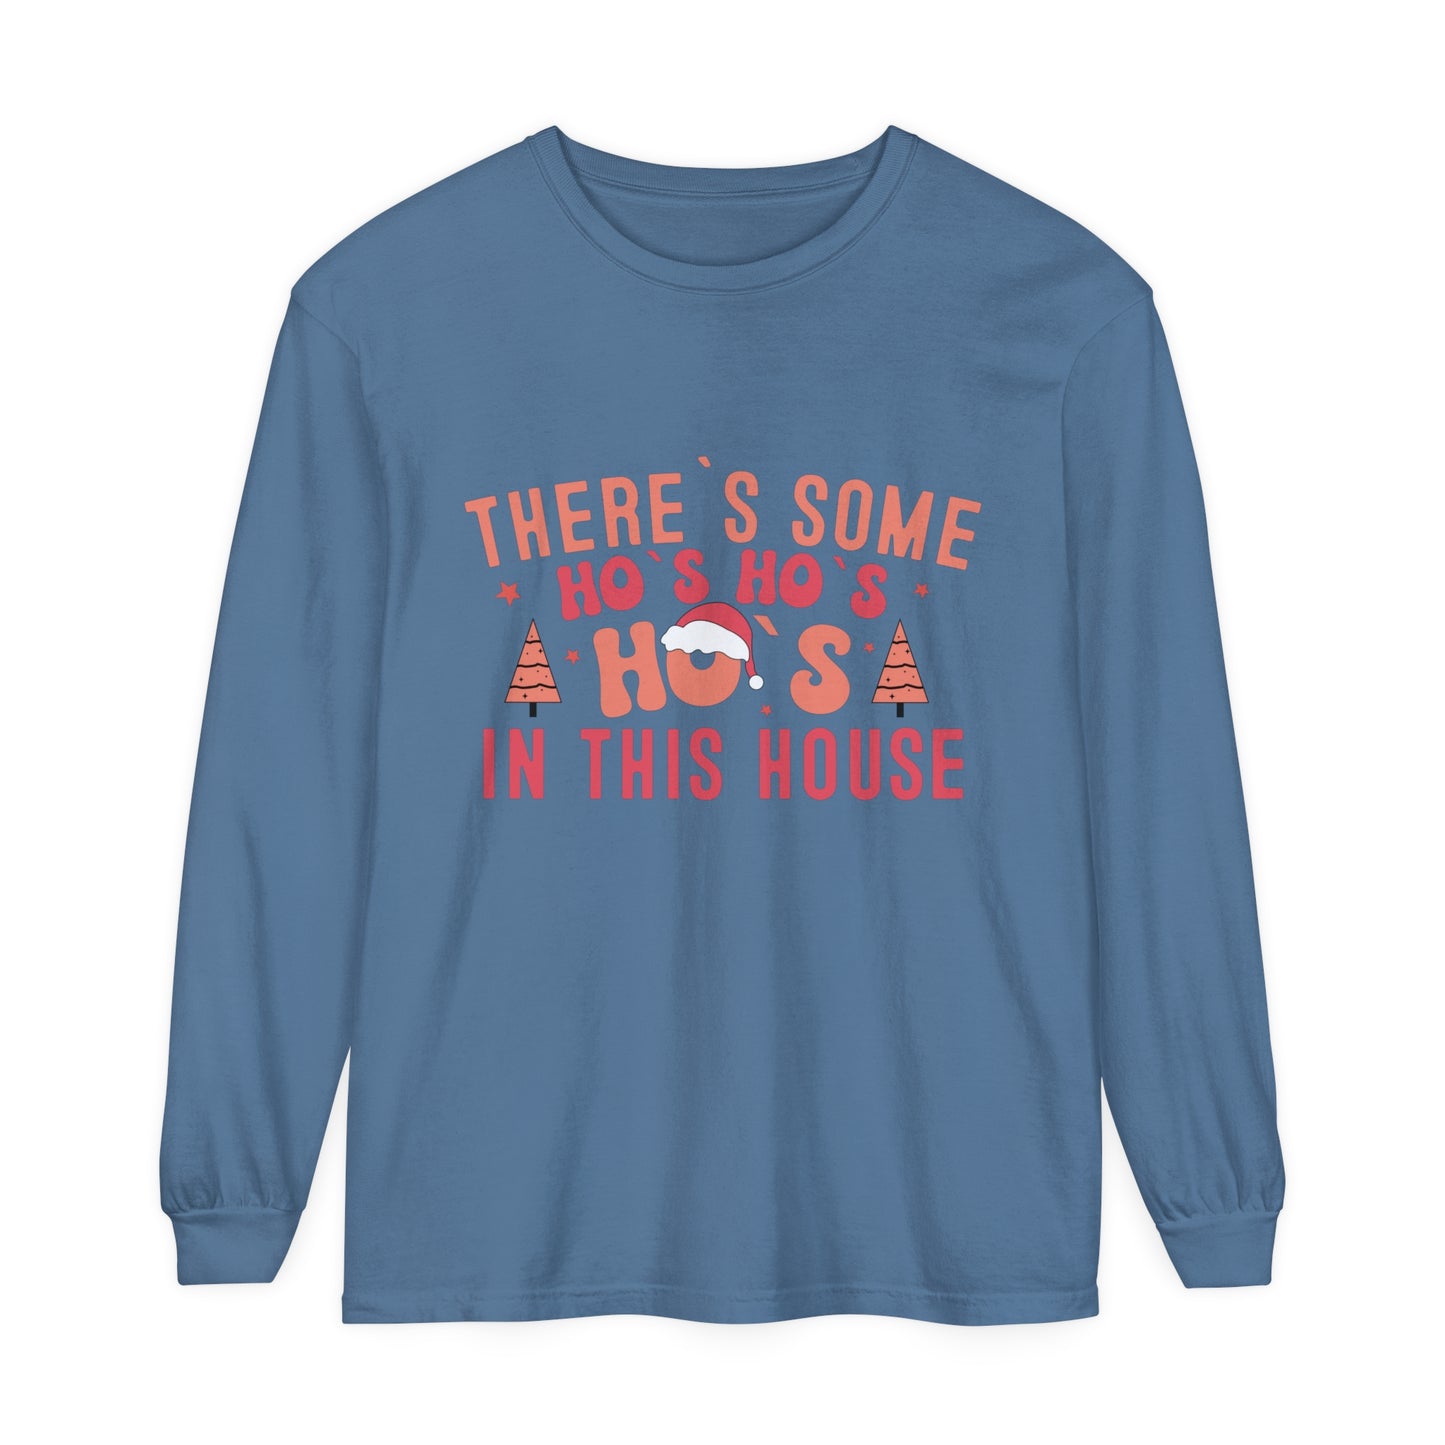 There's some HO HO HOs in this house Women's Funny Humor Christmas Holiday Loose Long Sleeve T-Shirt